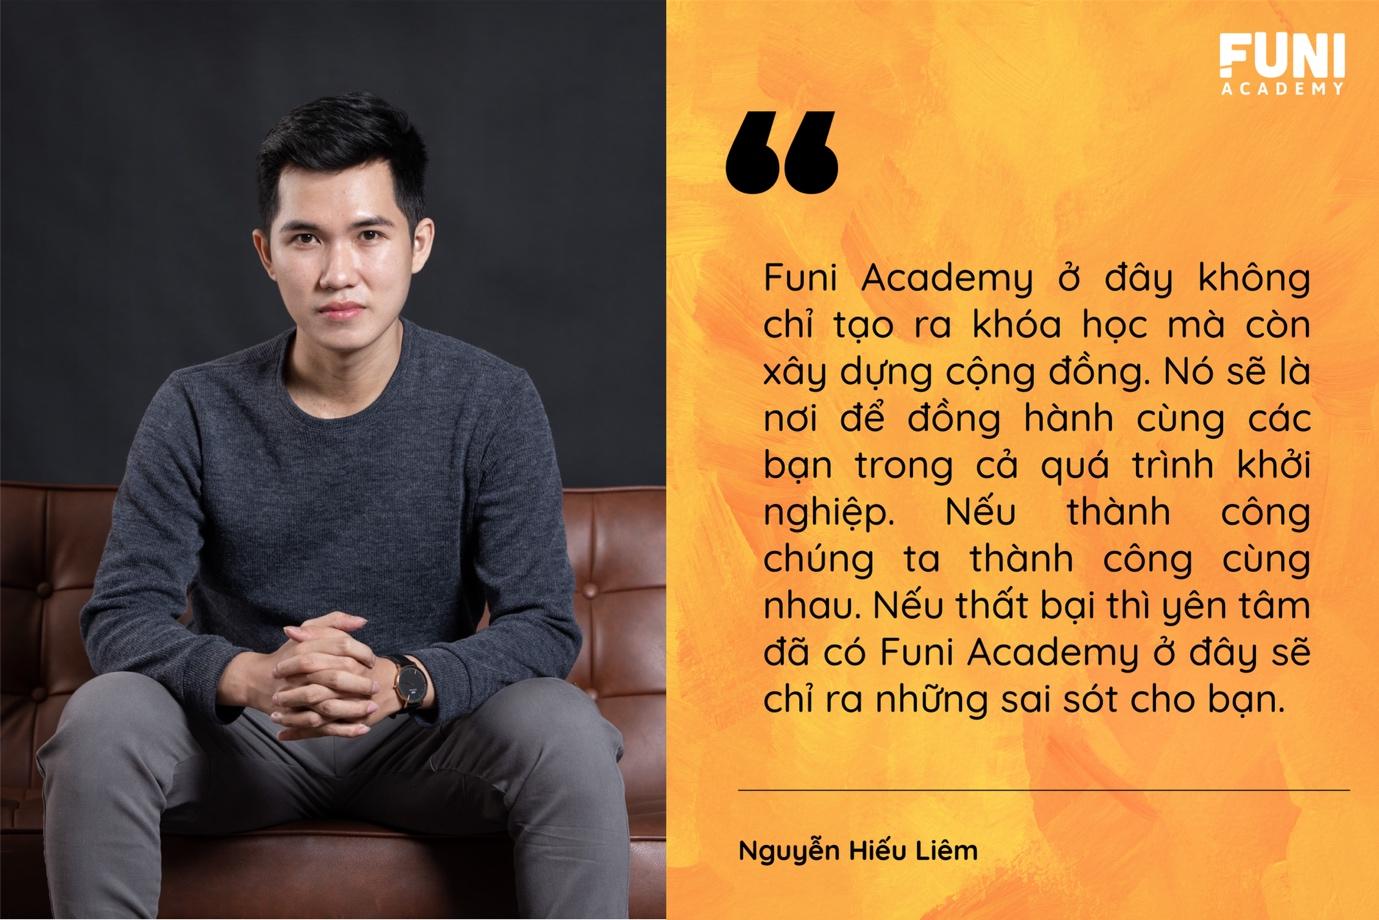 Nguyen Hieu Liem: Giving wings to young people to start a business through e-commerce - Photo 2.